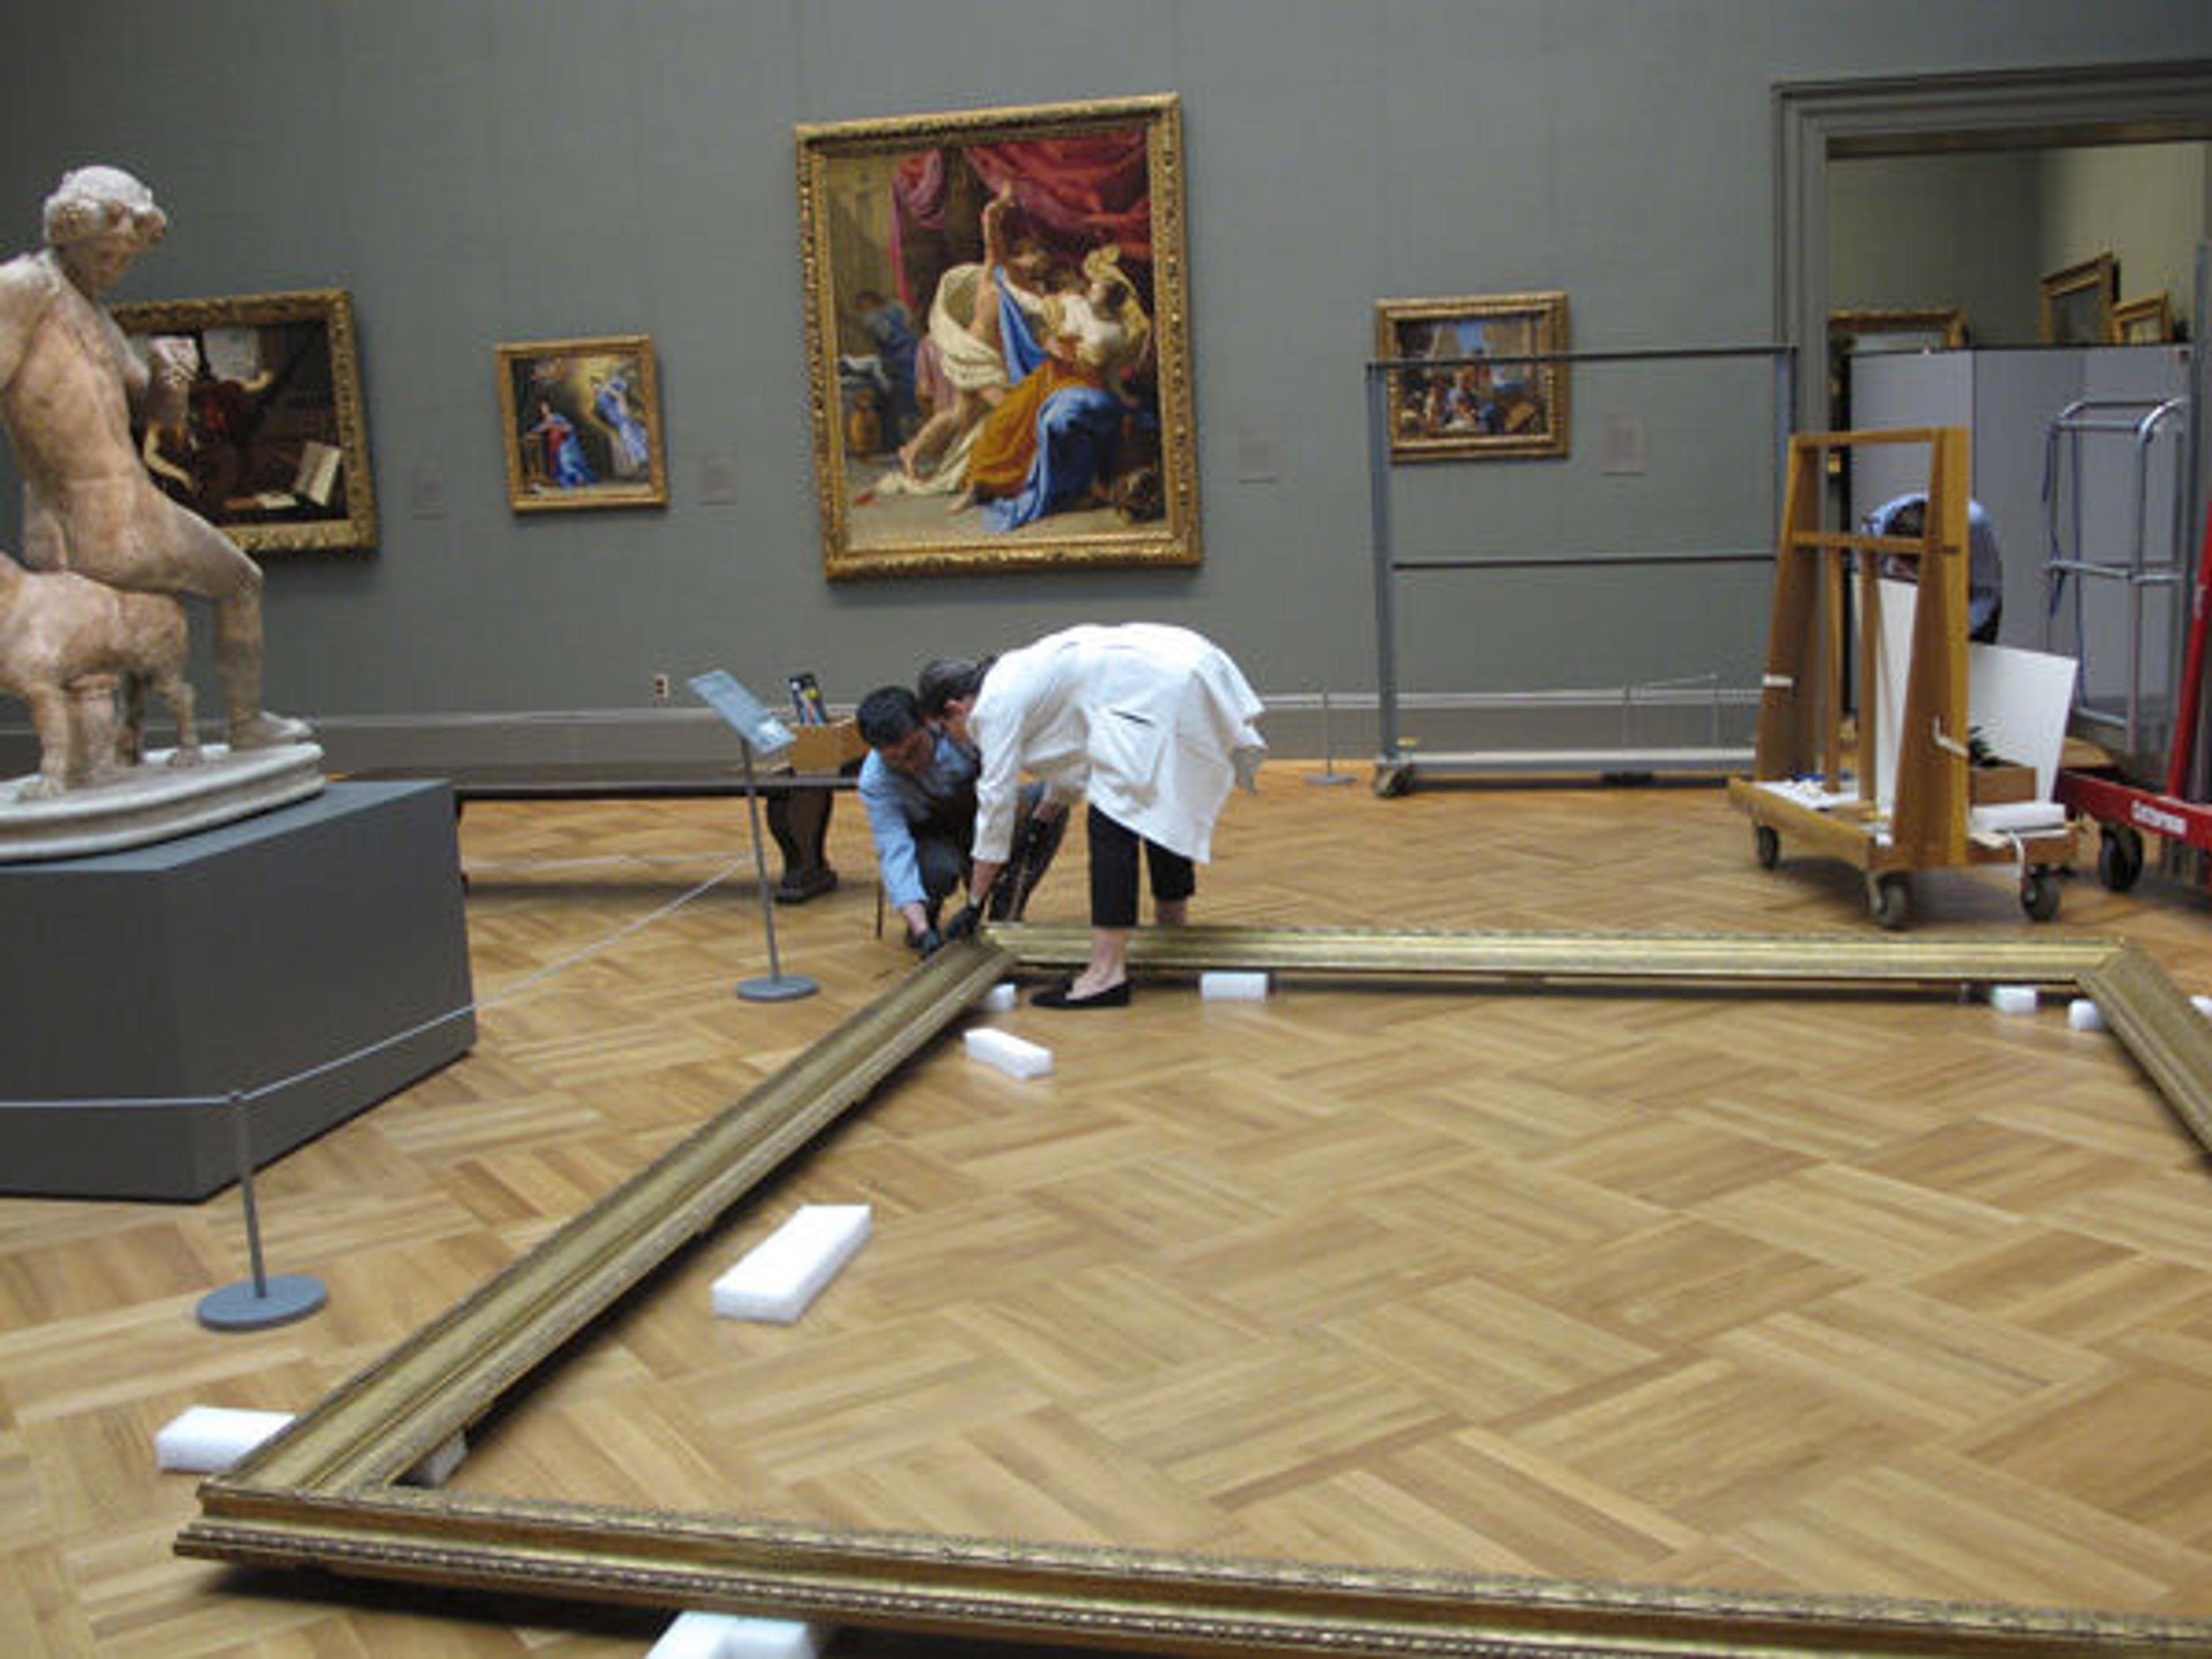 Assembling the frame in the gallery